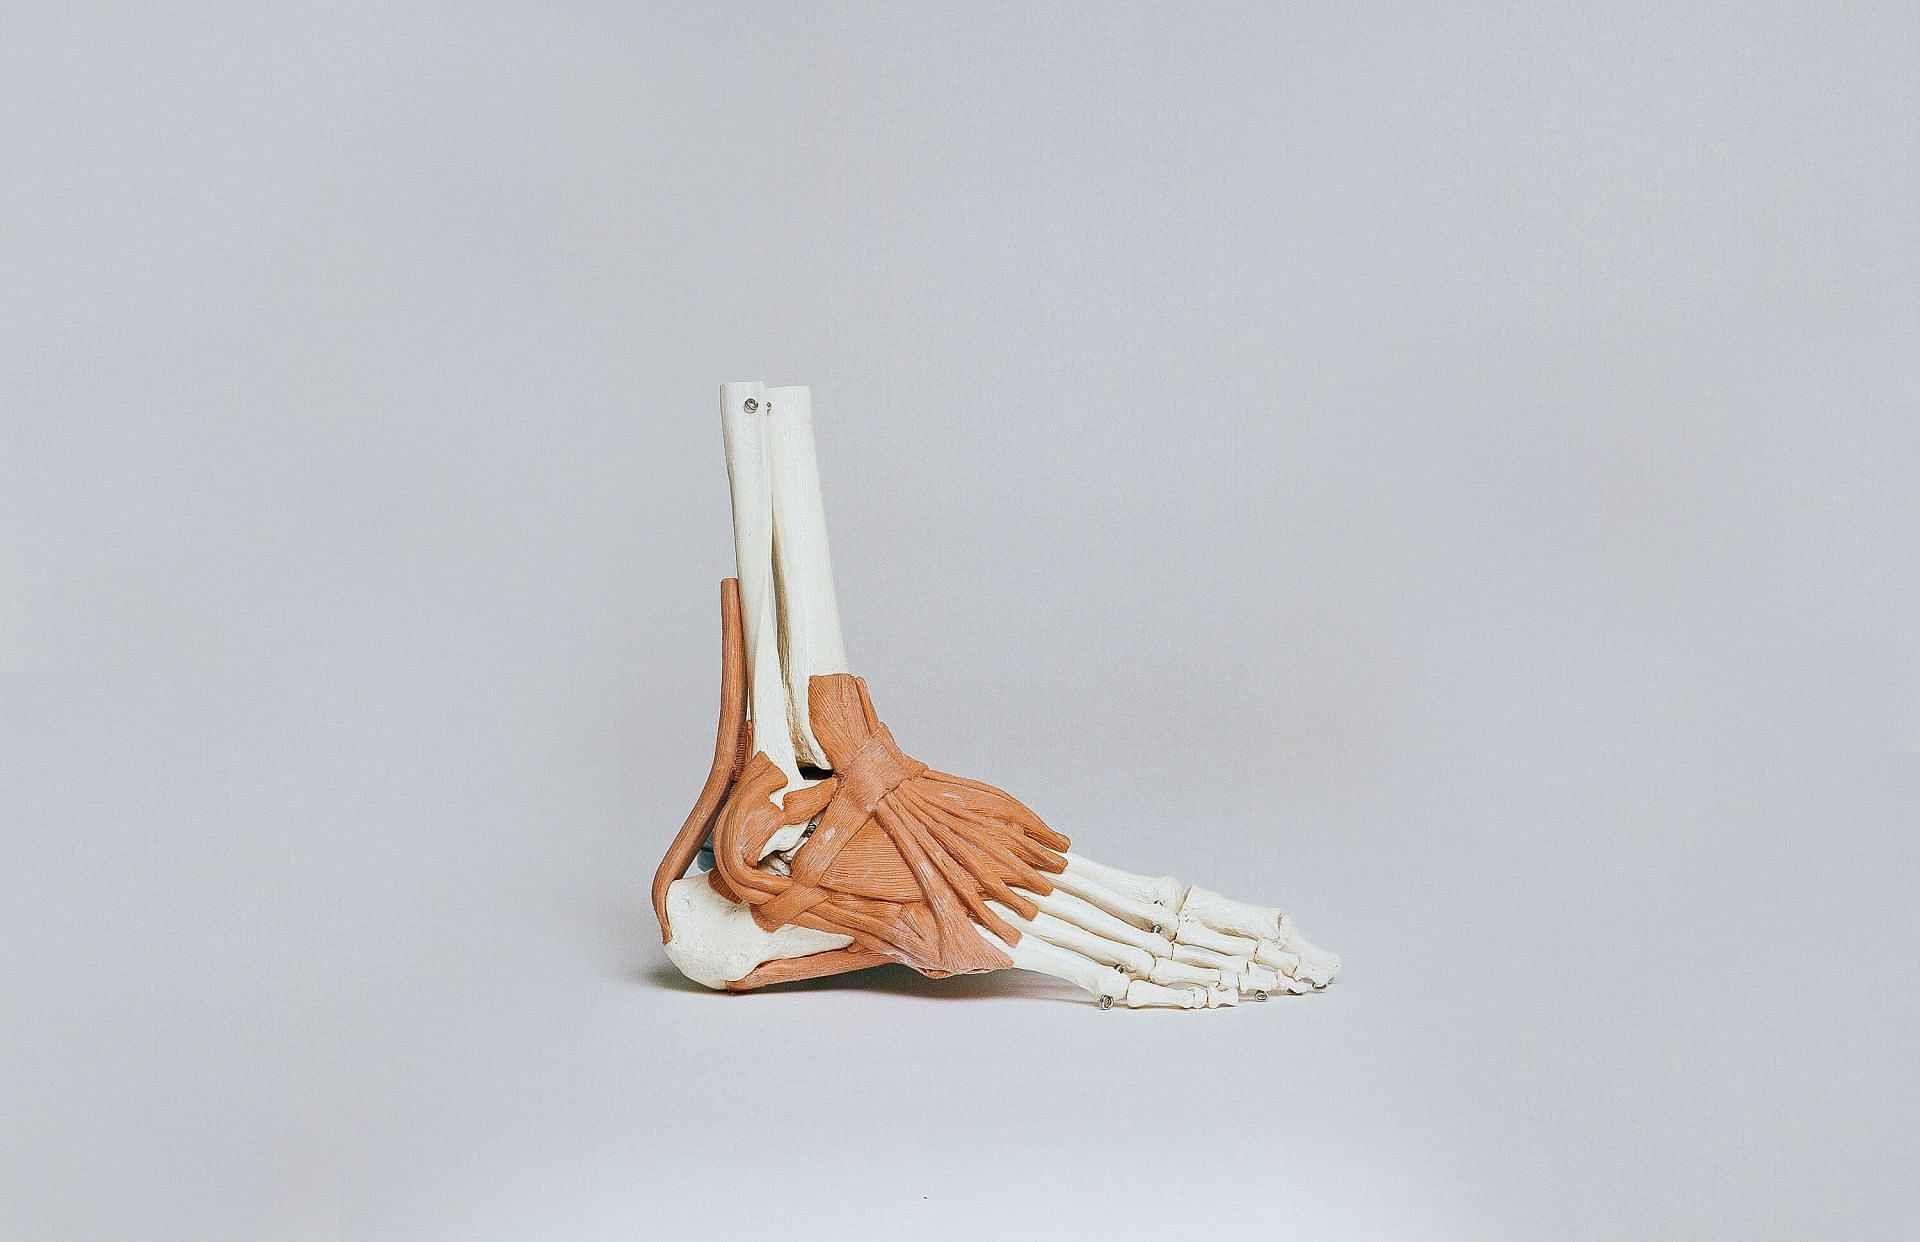 An anatomical image of an ankle against a white backdrop.